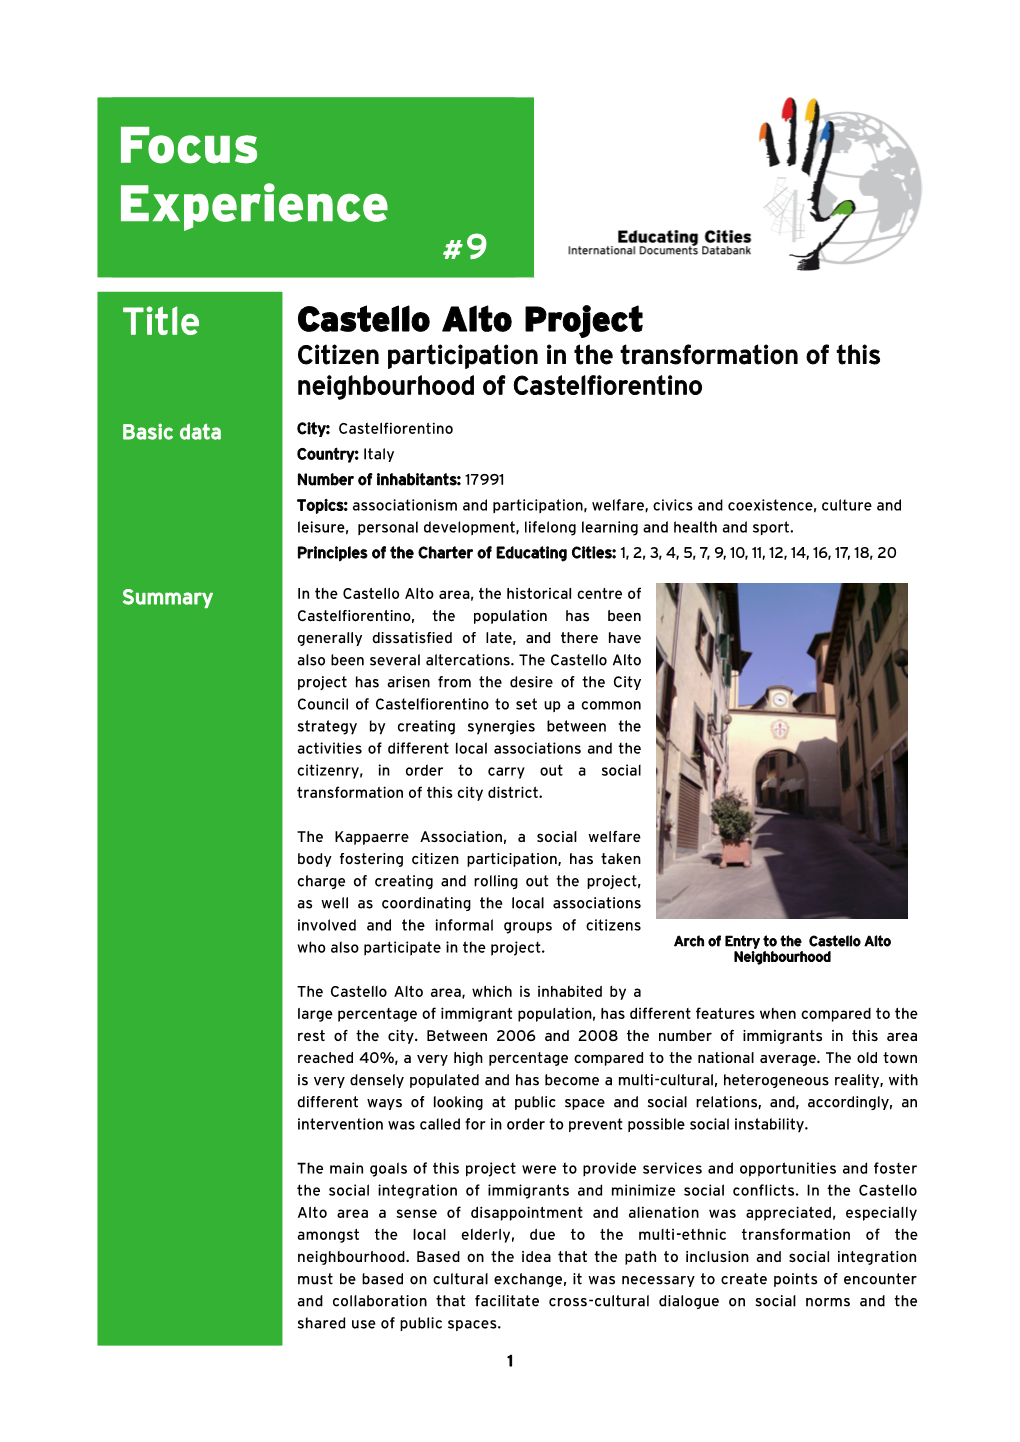 Castello Alto Project Citizen Participation in the Transformation of This Neighbourhood of Castelfiorentino